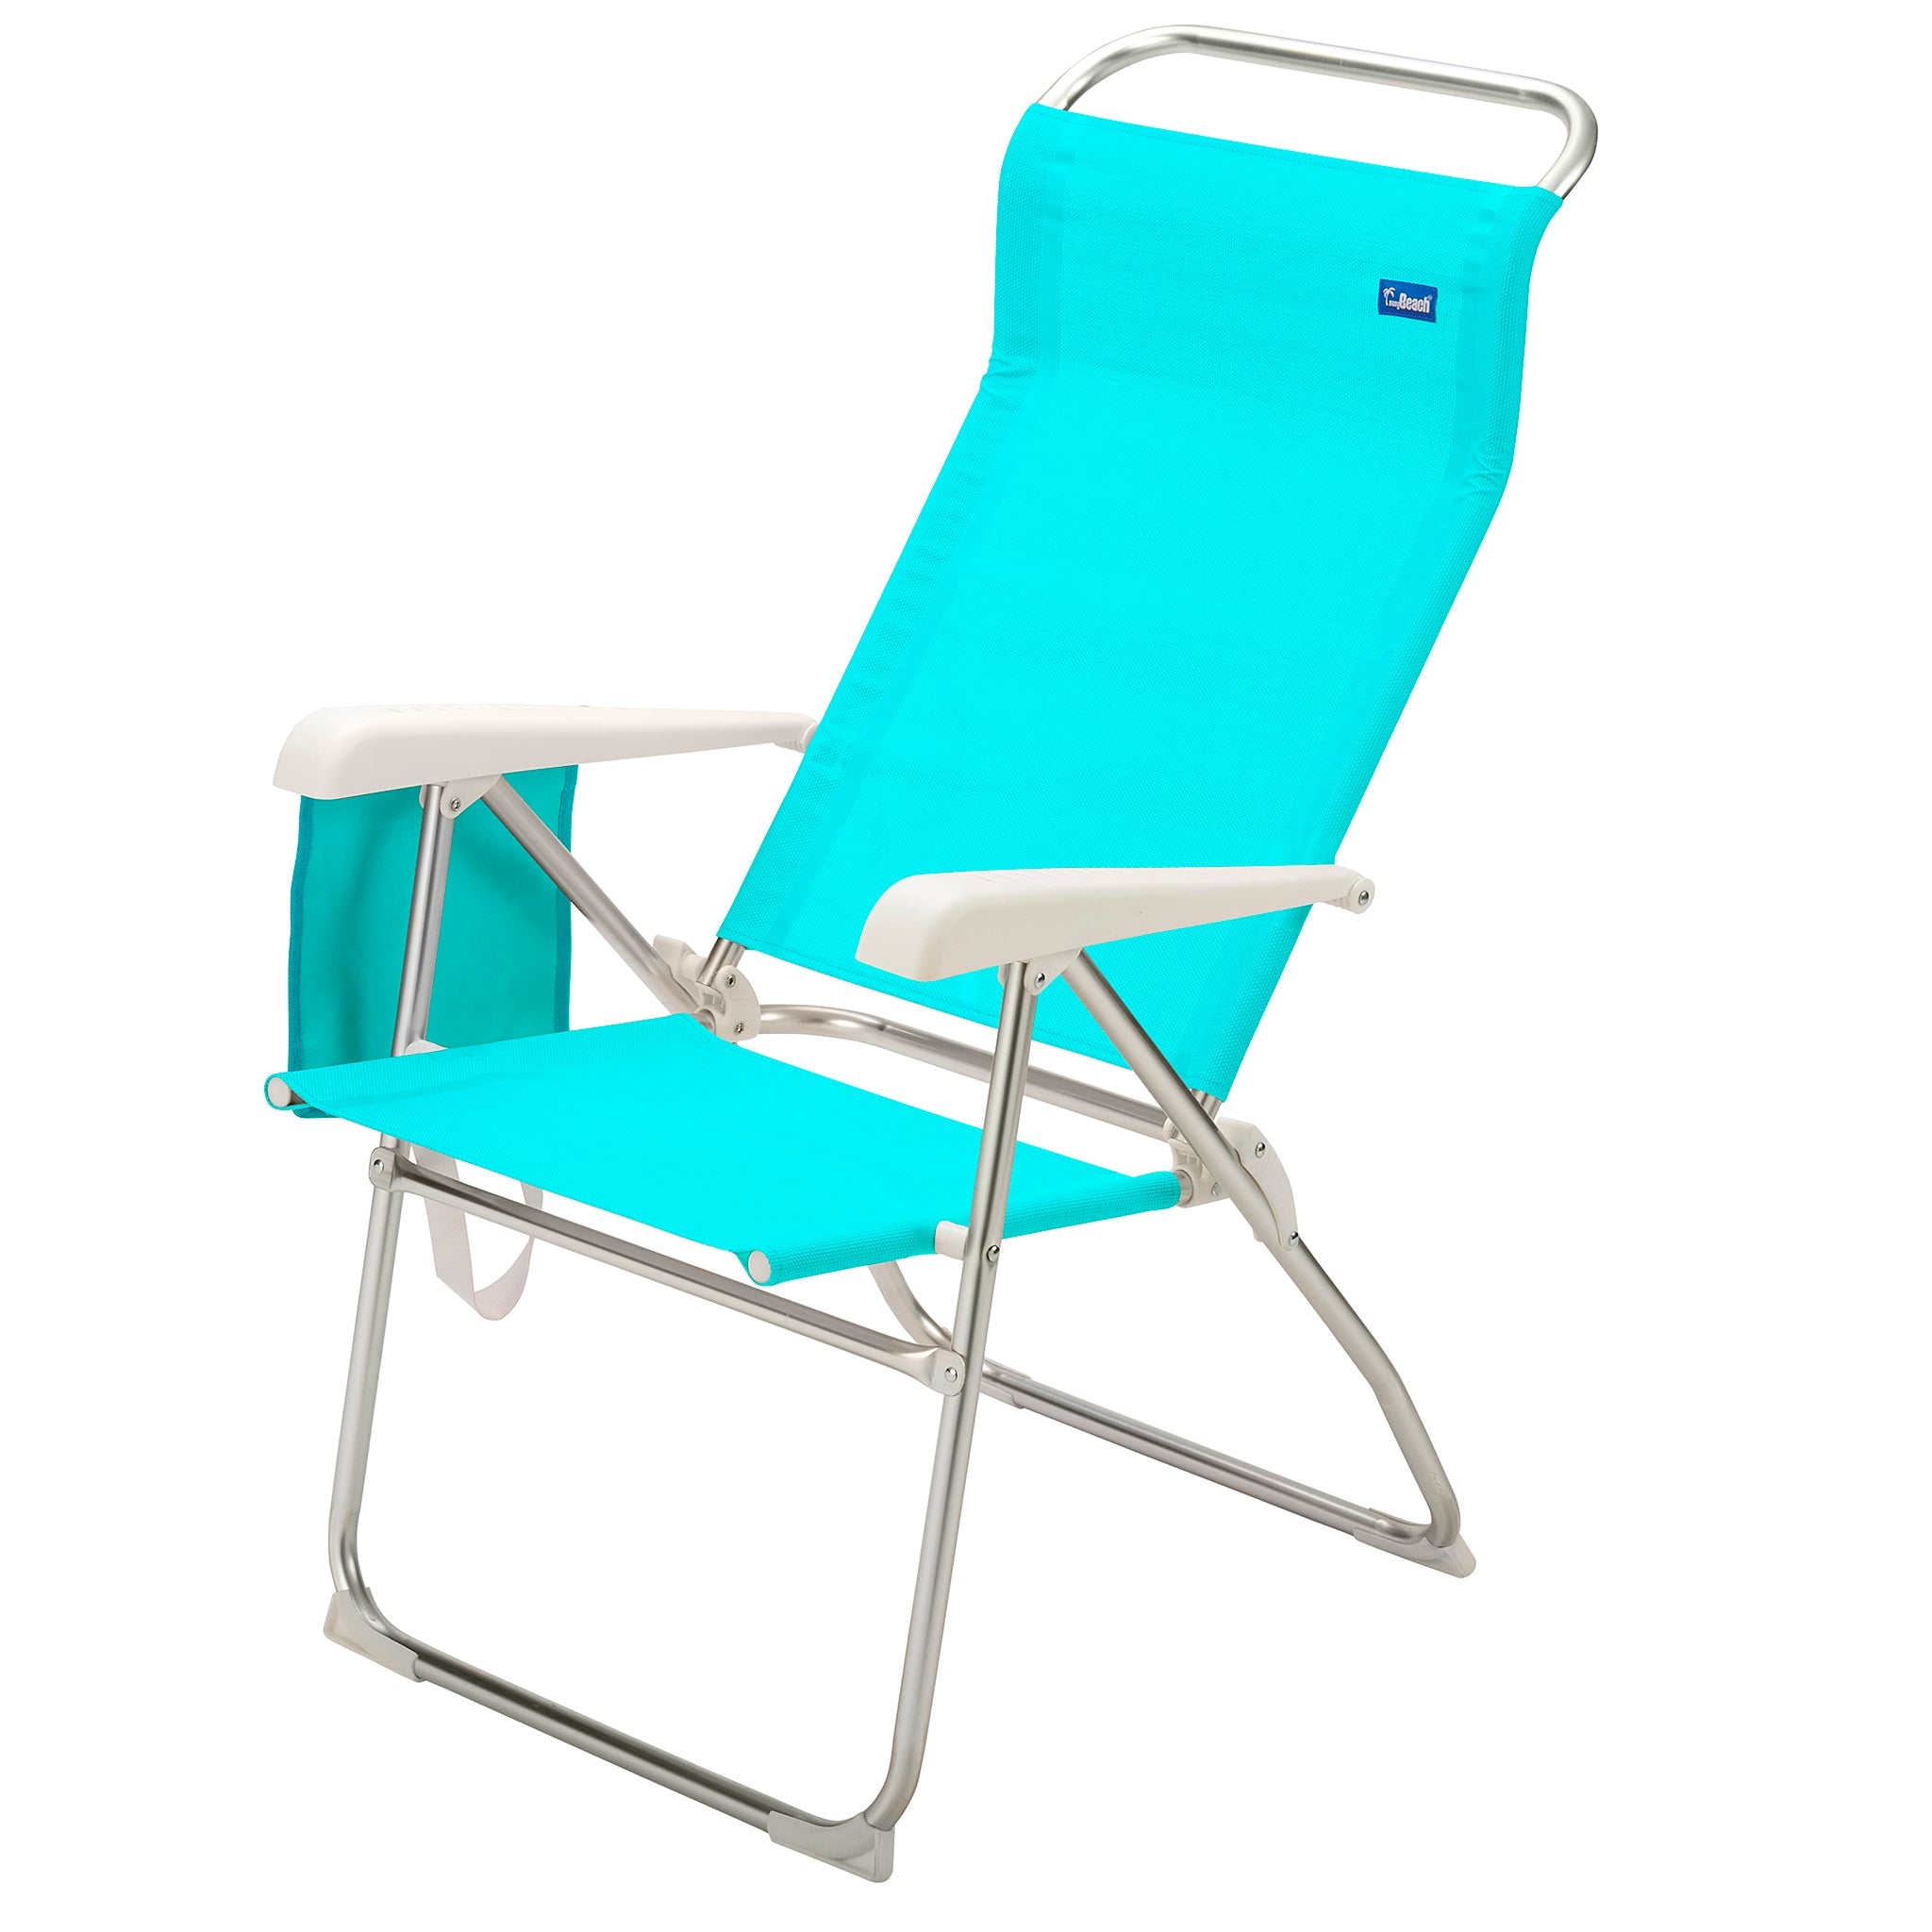 Wholesale Tall 8-Postion Beach Chairs - Case Pack of 4